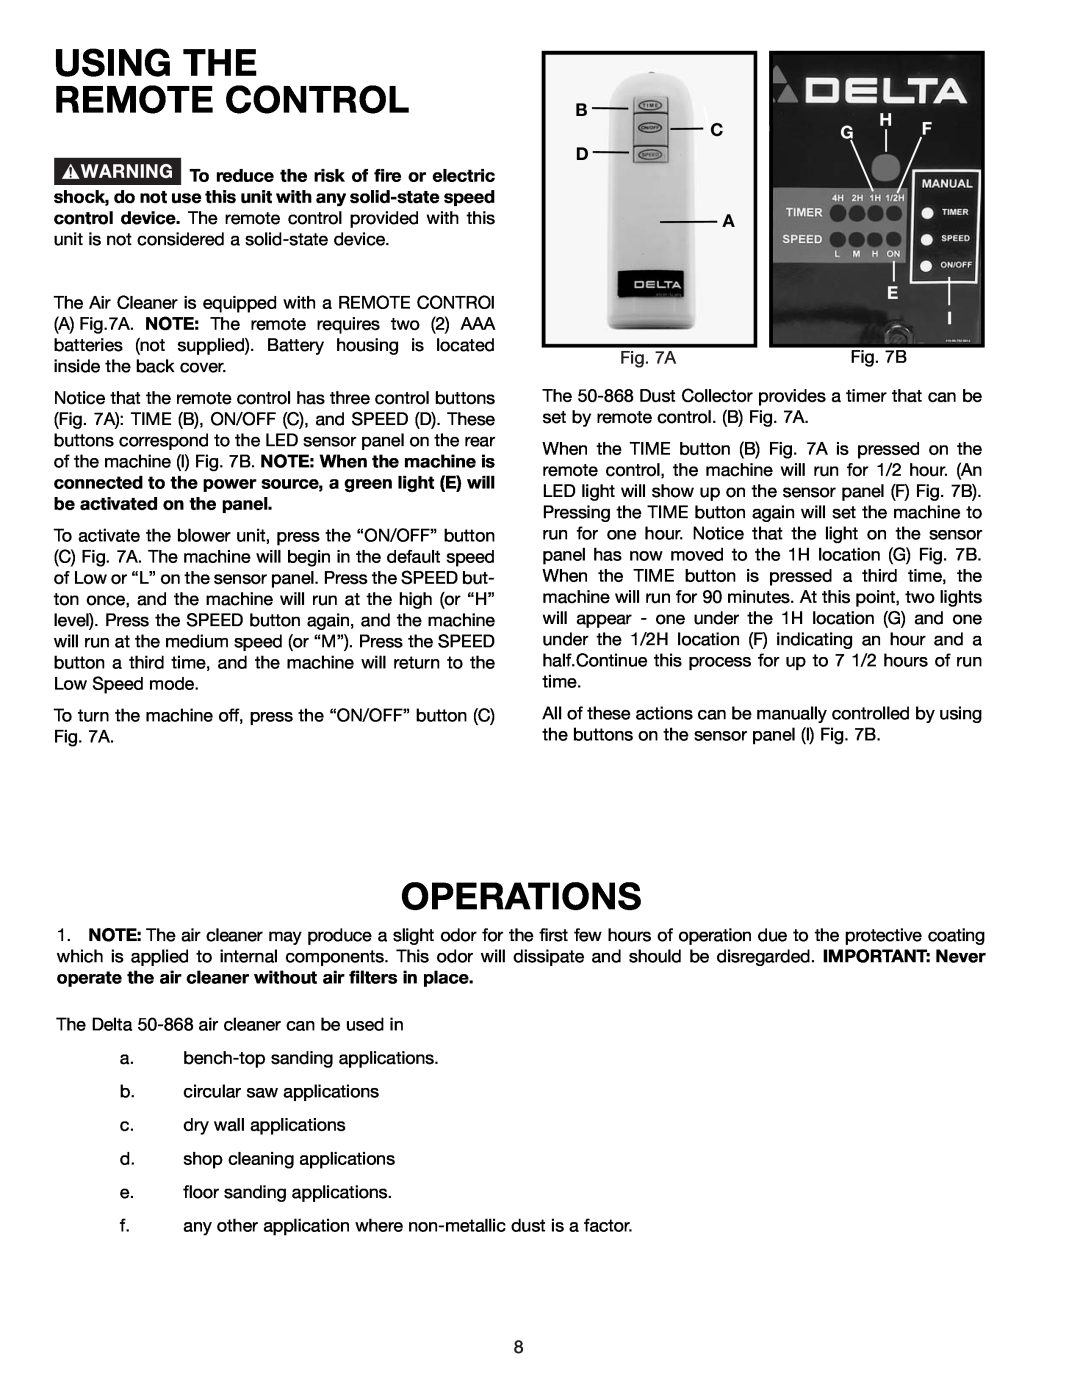 Deltaco 50-868 instruction manual Using The Remote Control, Operations, B C D A, H G F E 